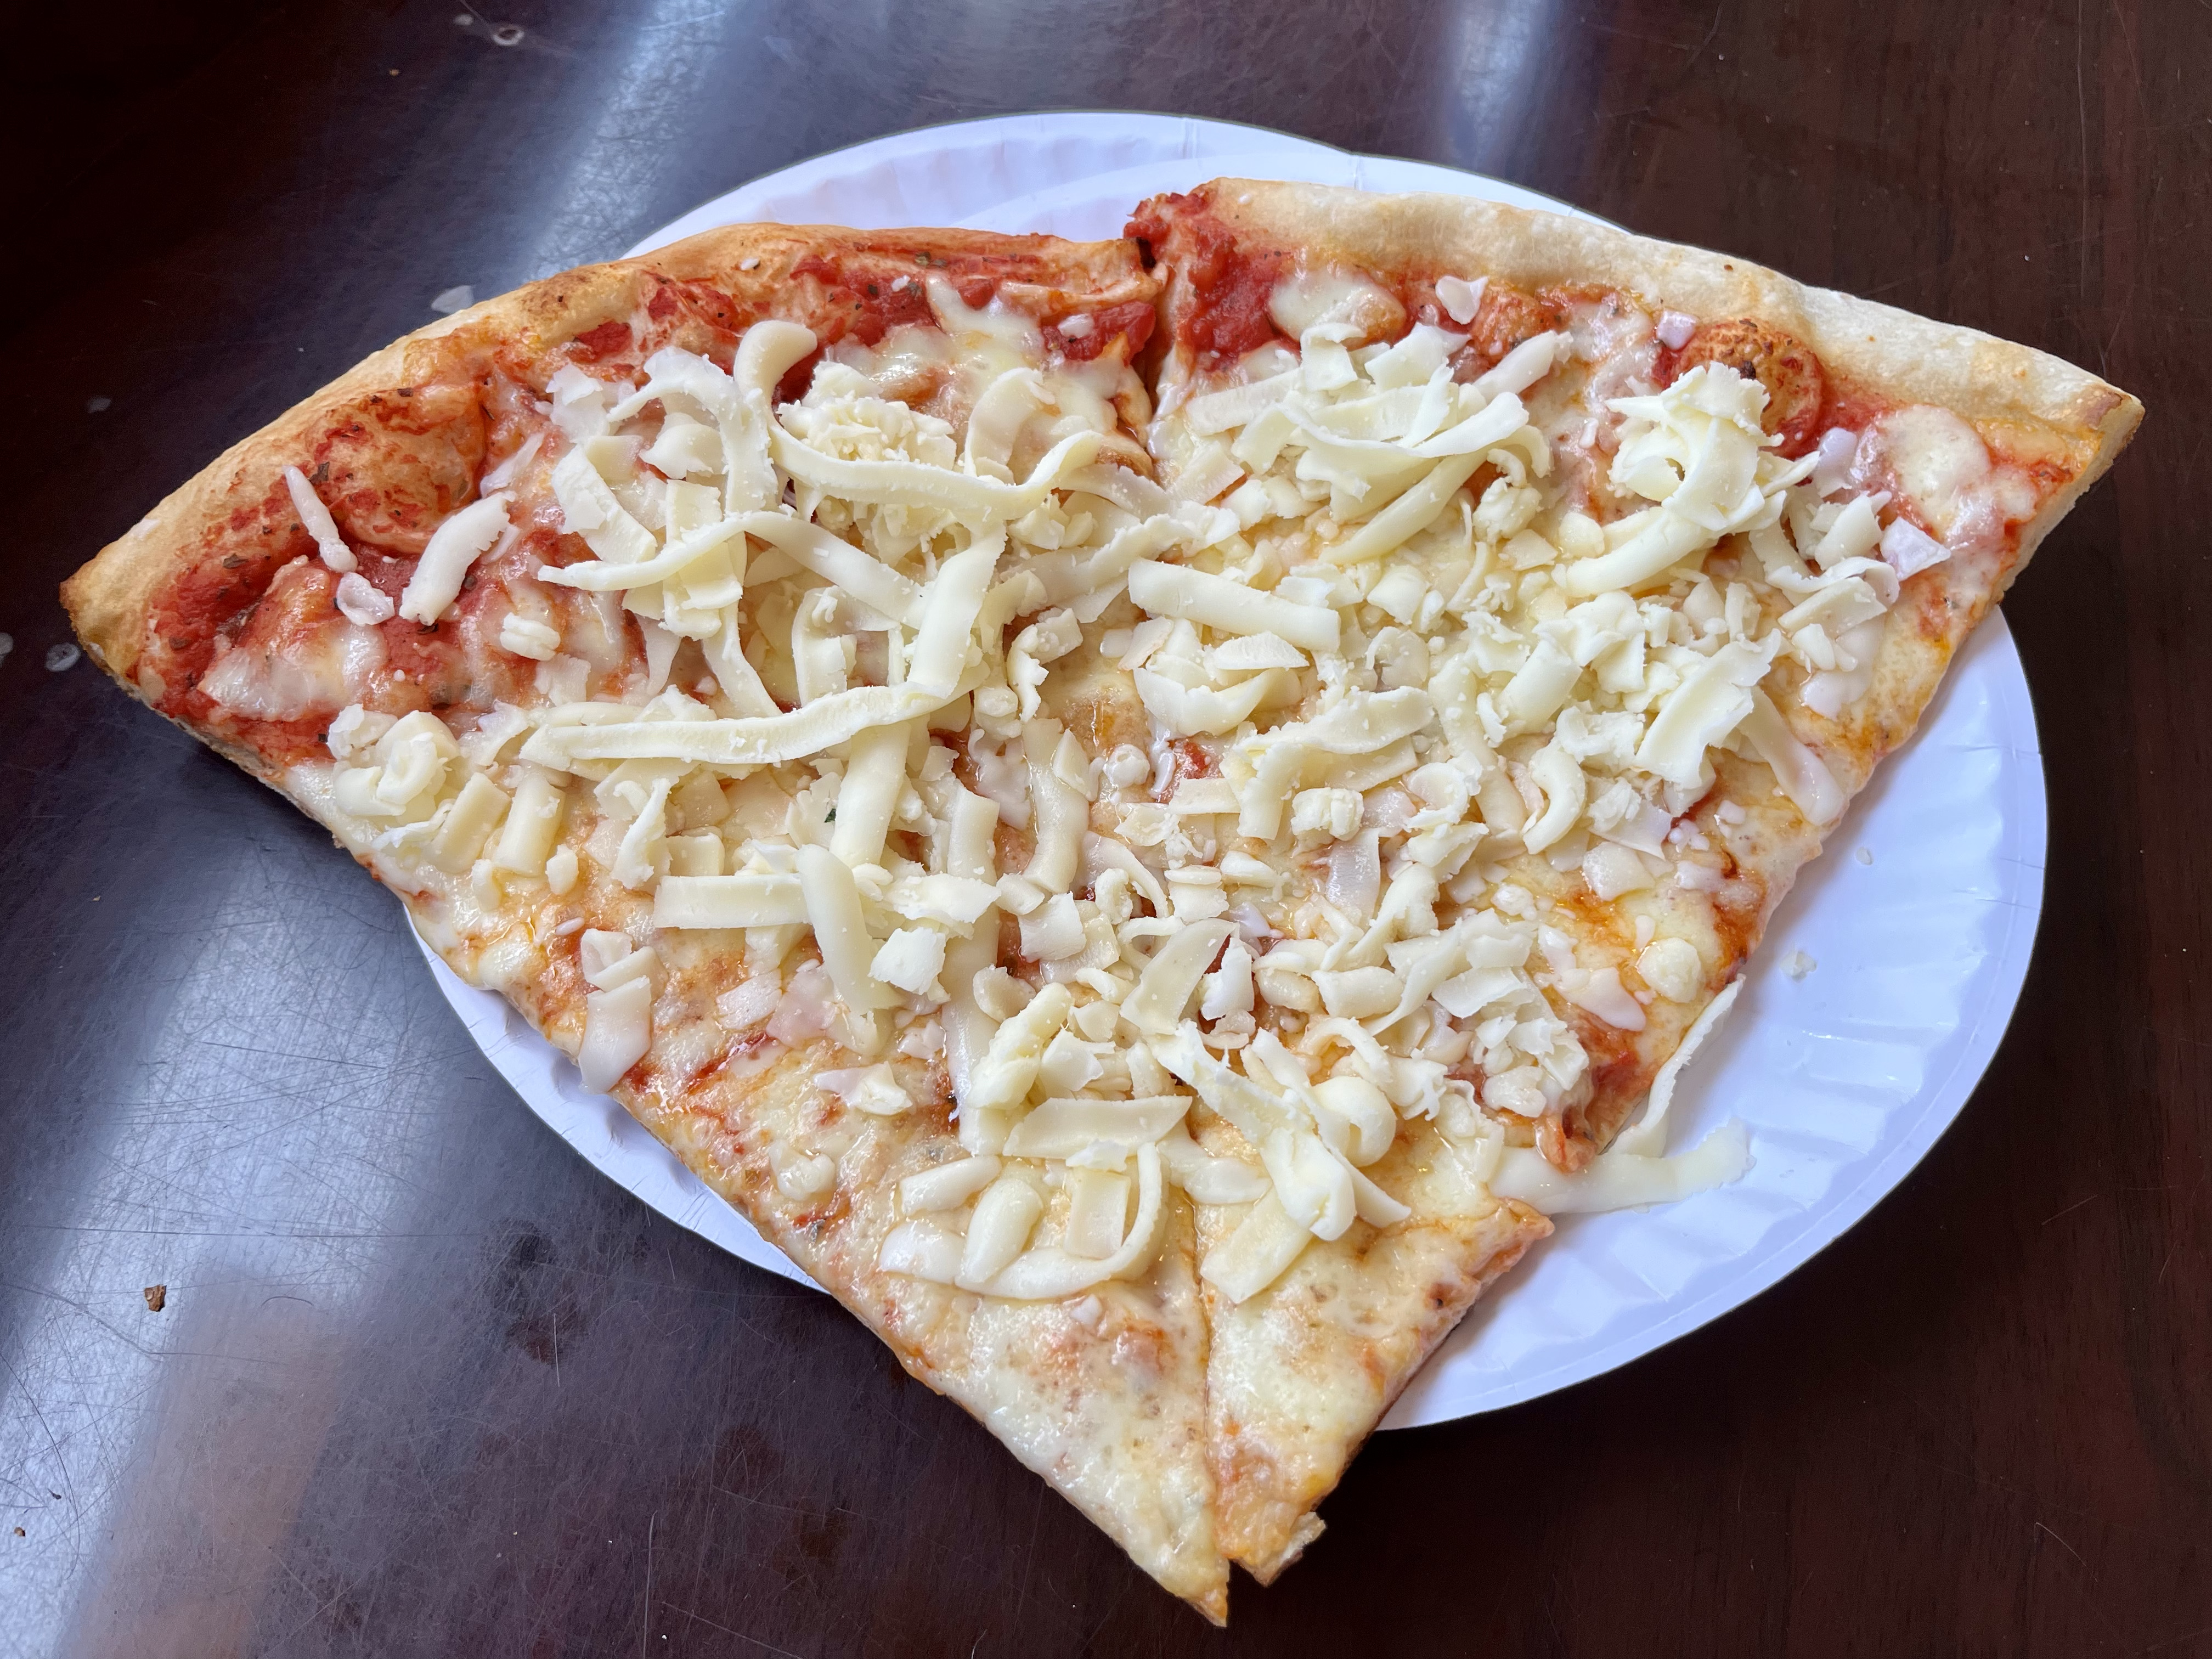 slice of cheese pizza